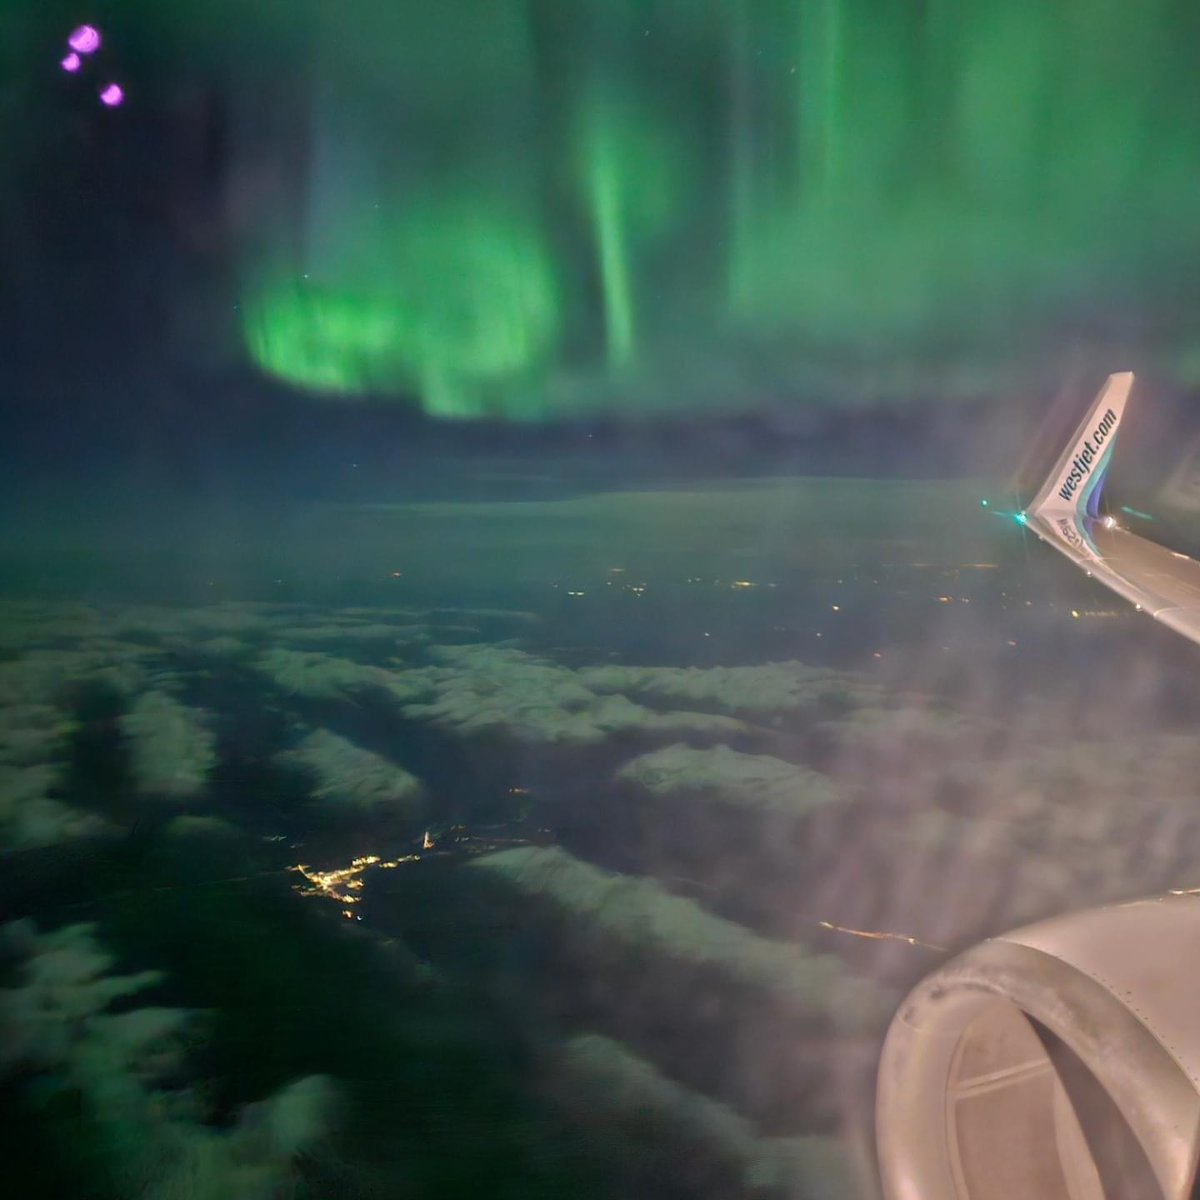 What could make a delayed, late-night flight more bearable after a long work week? A front row seat to the #auroraborealis would do the trick! 

Our Service Manager, Bryan Davies enjoyed a flight through the #northernlights last week. Thank you for your hard work and commitment!